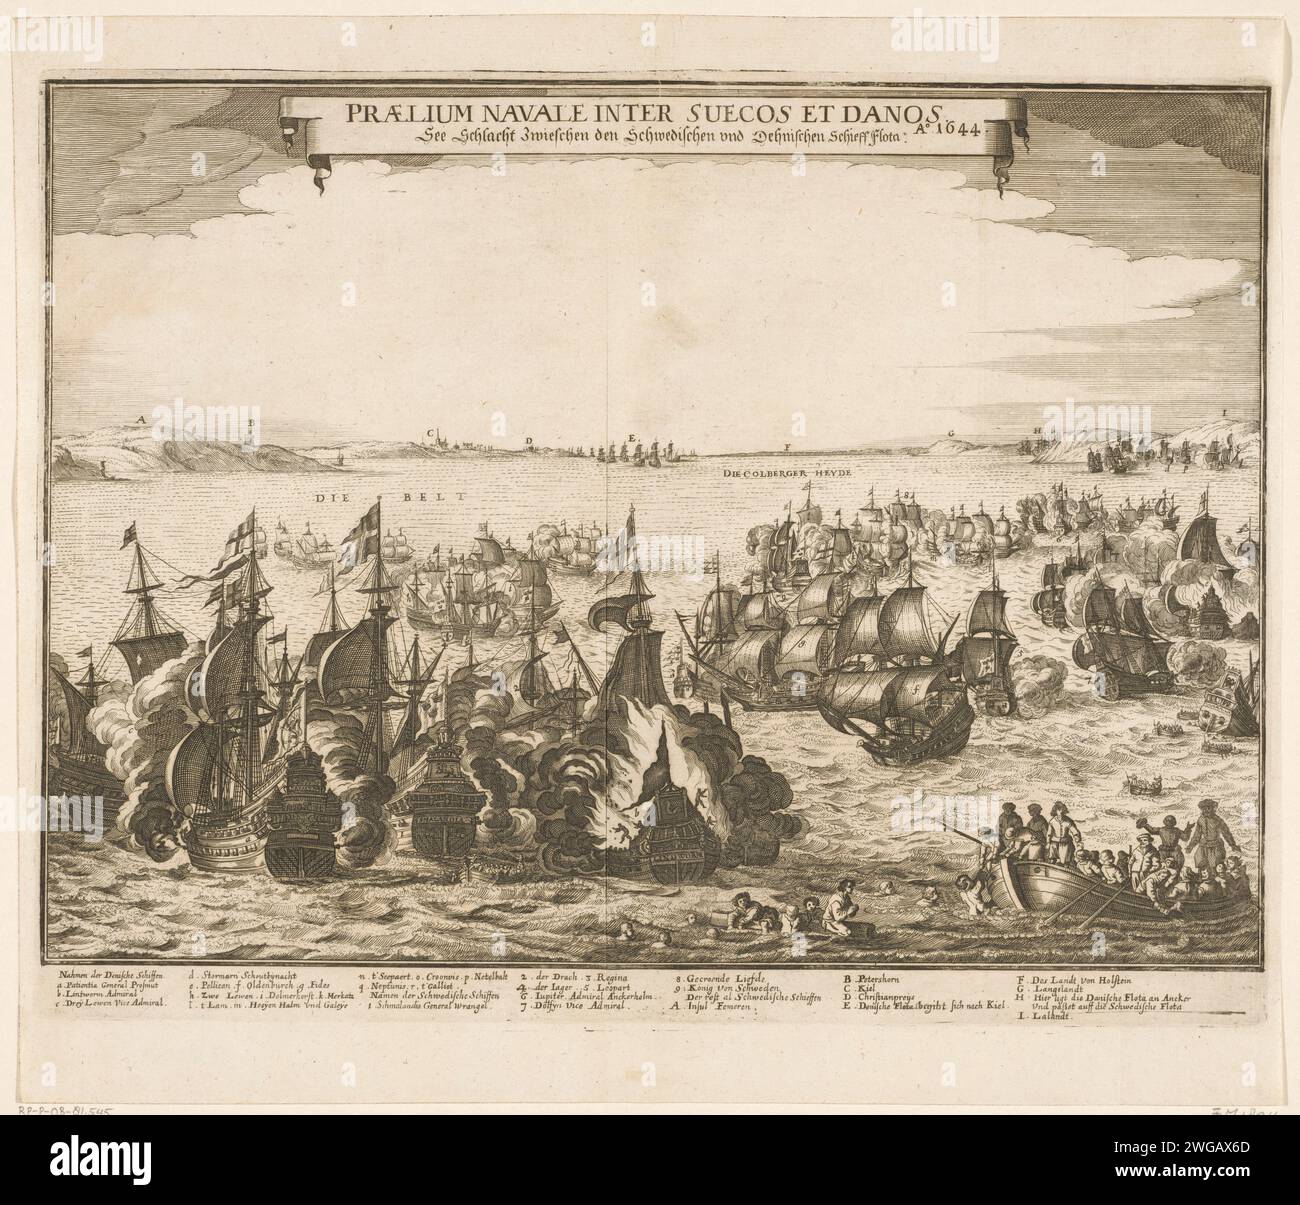 Sea battle between the Swedish and Danish fleets in the Belt, 1644, 1644 print Sea battle between the Swedish and Danish fleets in the Fehmarn Belt (between the Danish Lolland and the German island of Fehmarn), October 23, 1644. The Swedes are assisted by a Dutch fleet under Maerten Thijssen Anckerhelm. Sea battle in full swing, centrally the burning Danish ship De Lindeworm, in the foreground drowning people in a sloop. In the caption De Legends A-R and 1-9 and A-I in German. The print also includes a map with the location of the sea battle. Germany paper etching battle (+ naval force) Sweden Stock Photo